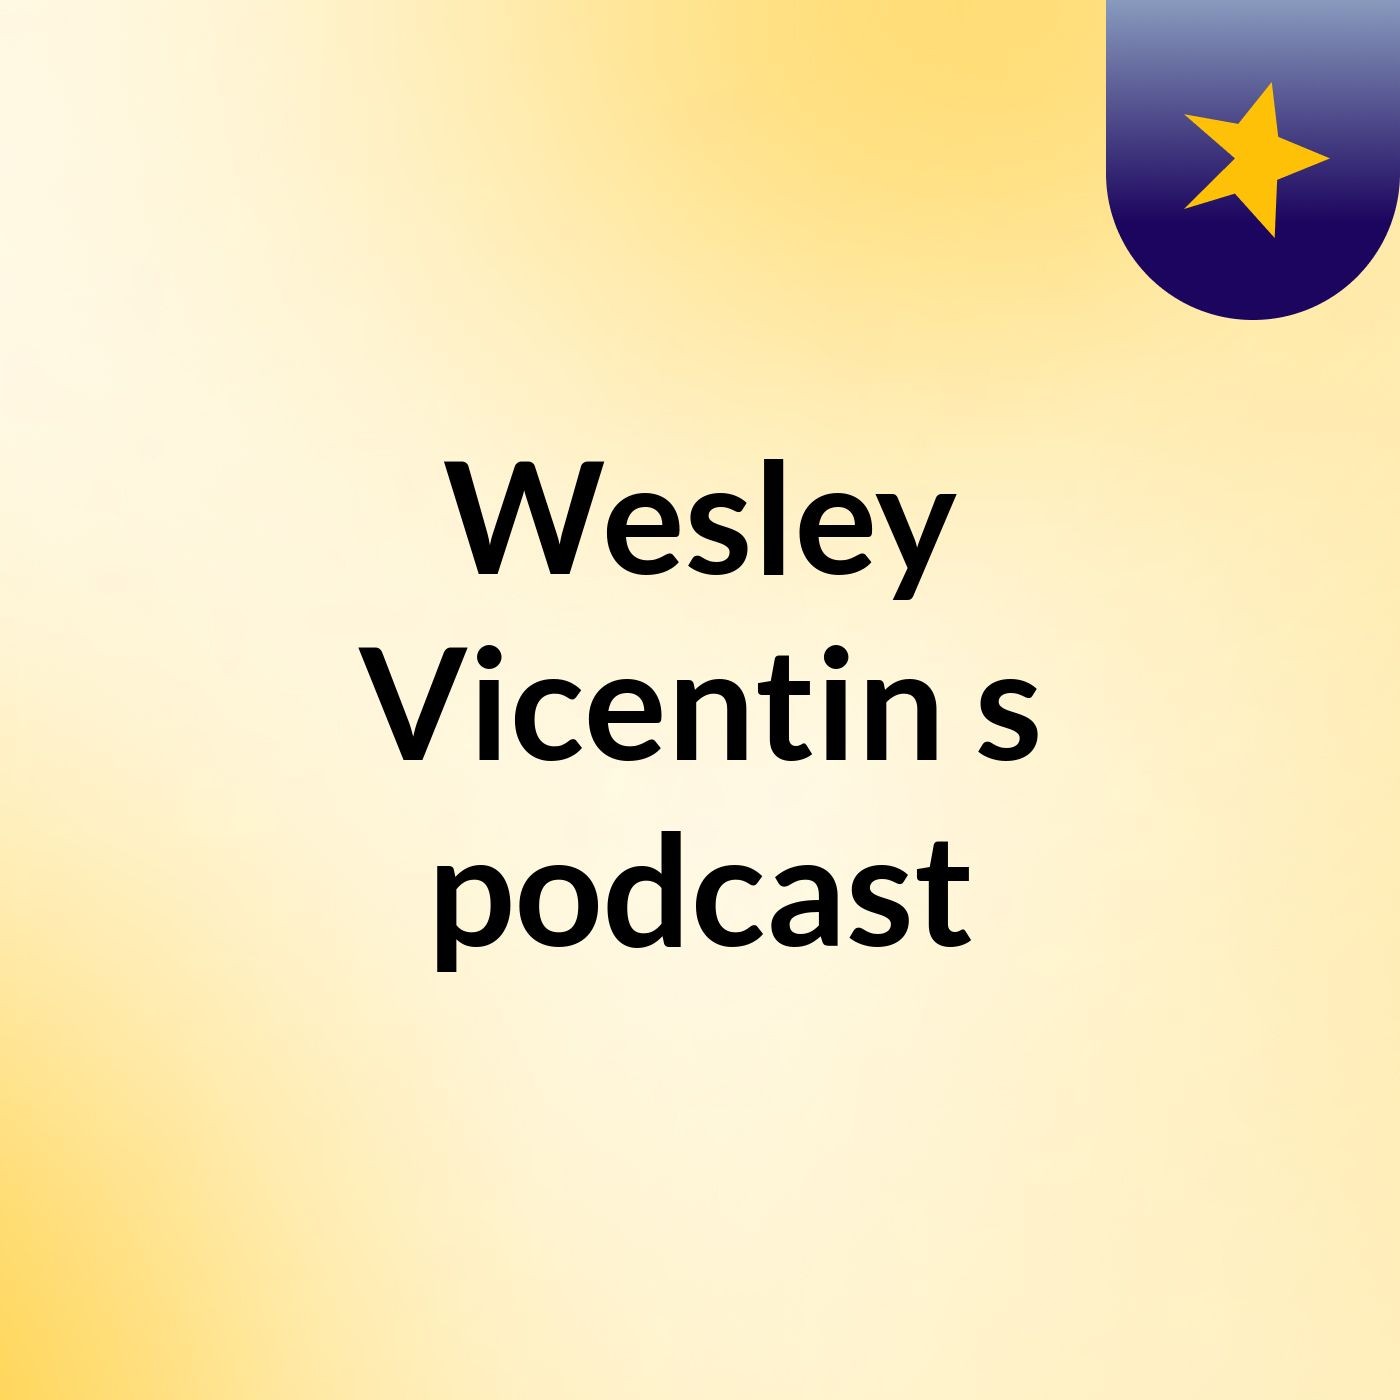 Wesley Vicentin's podcast